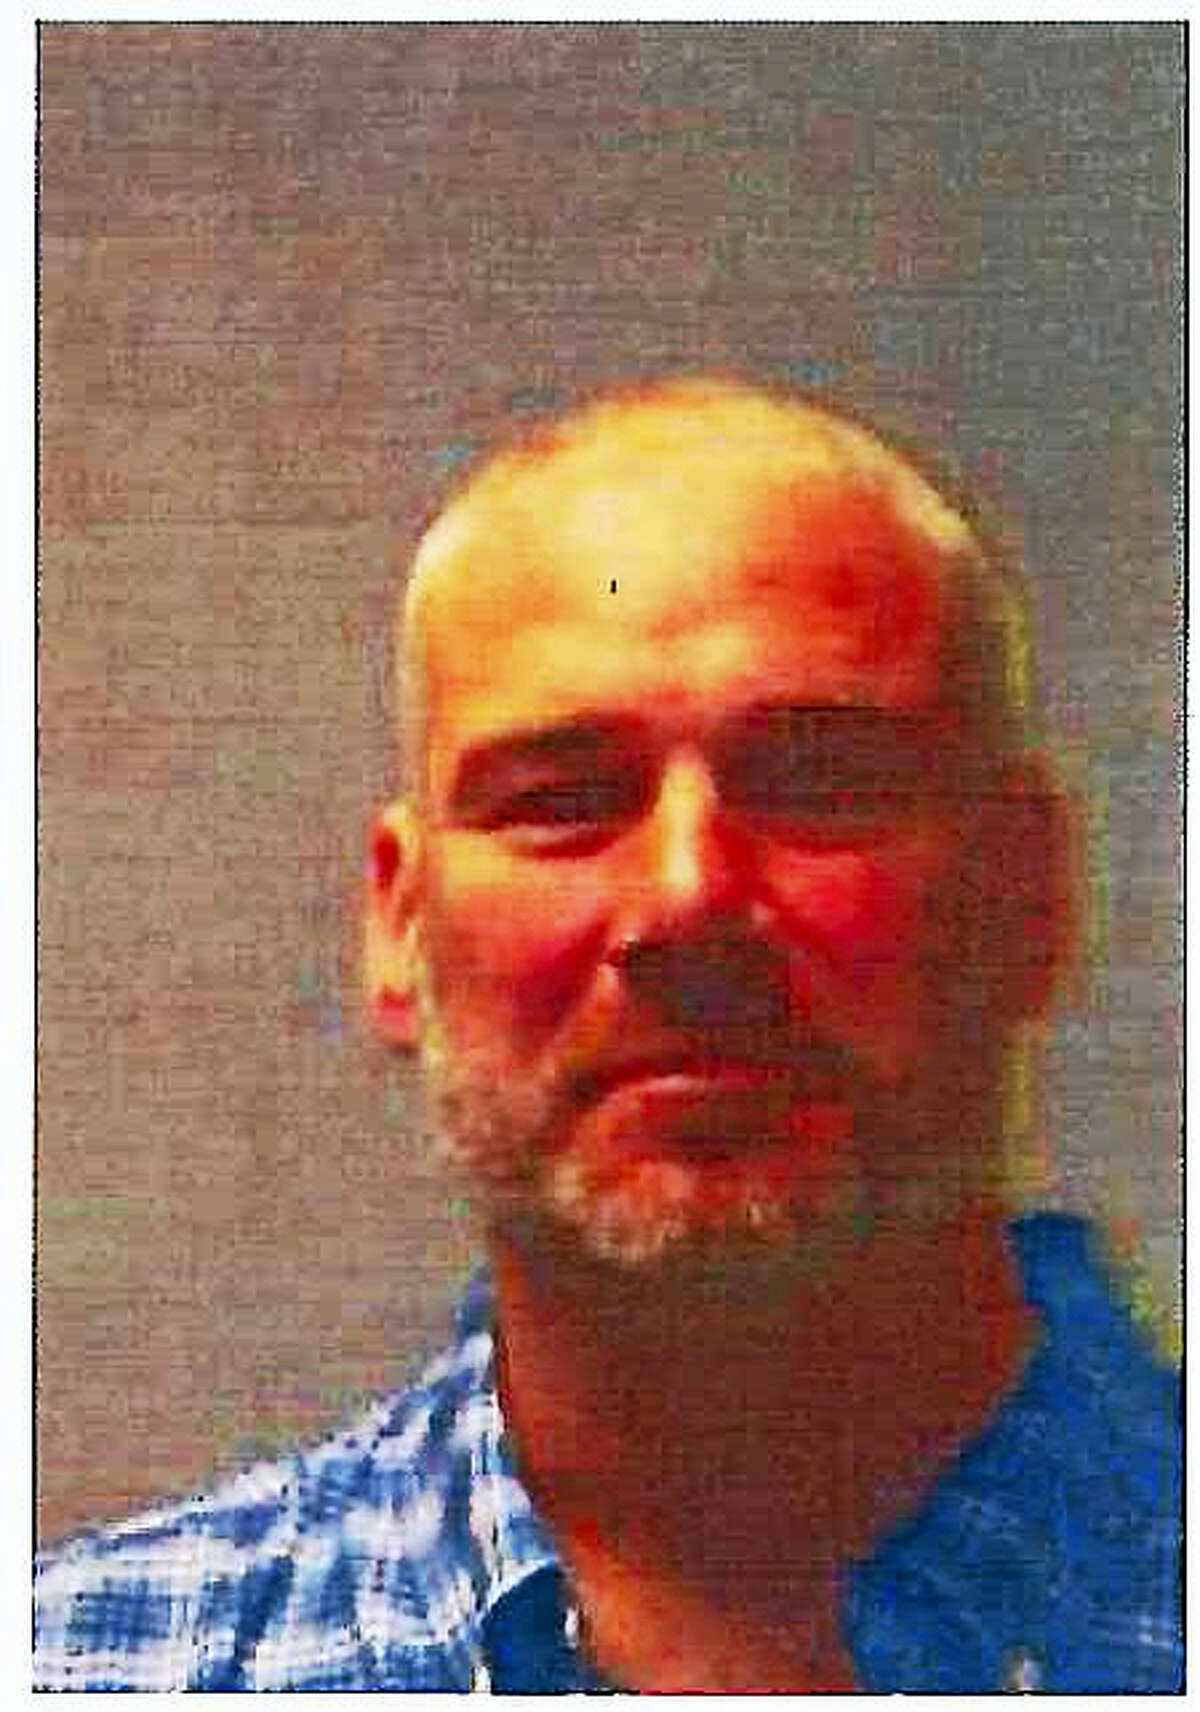 Michael Bourgoin (photo courtesy of Connecticut State Police)